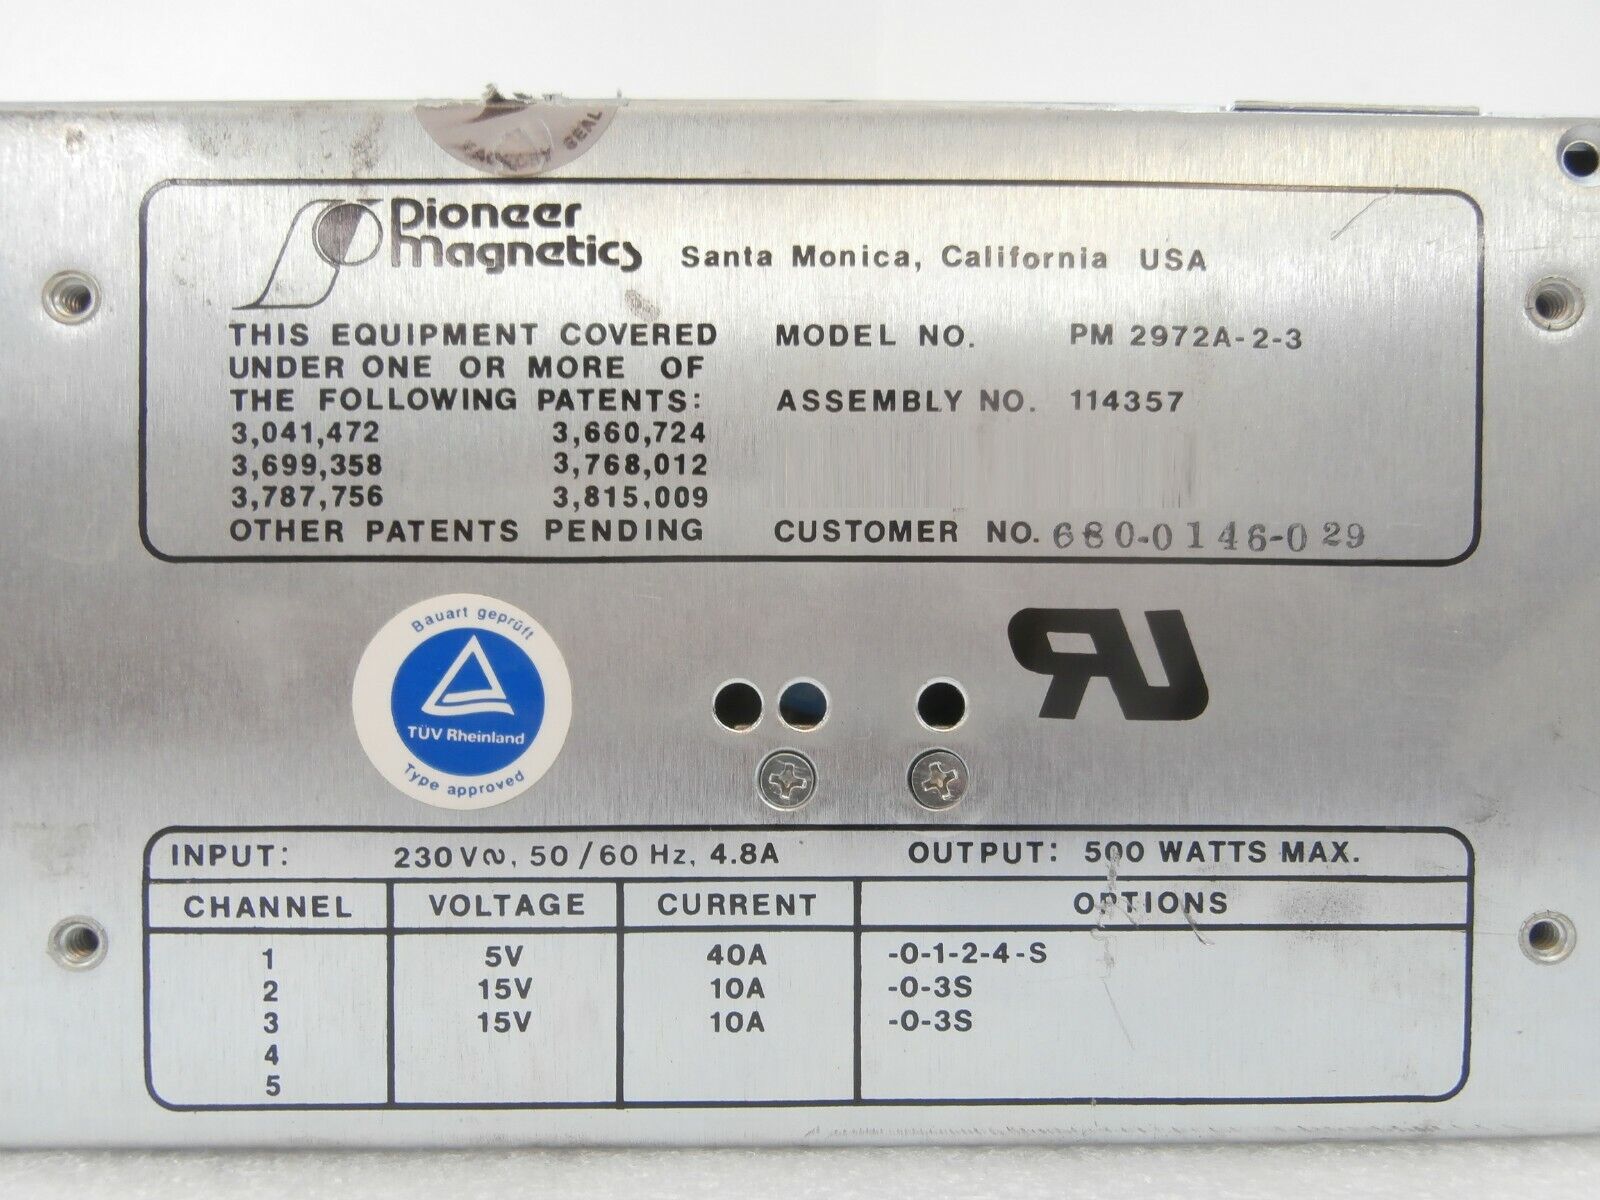 Pioneer Magnetics PM 2972A-2-3 DC Power Supply 114357 SVG 680-0146-029 Working